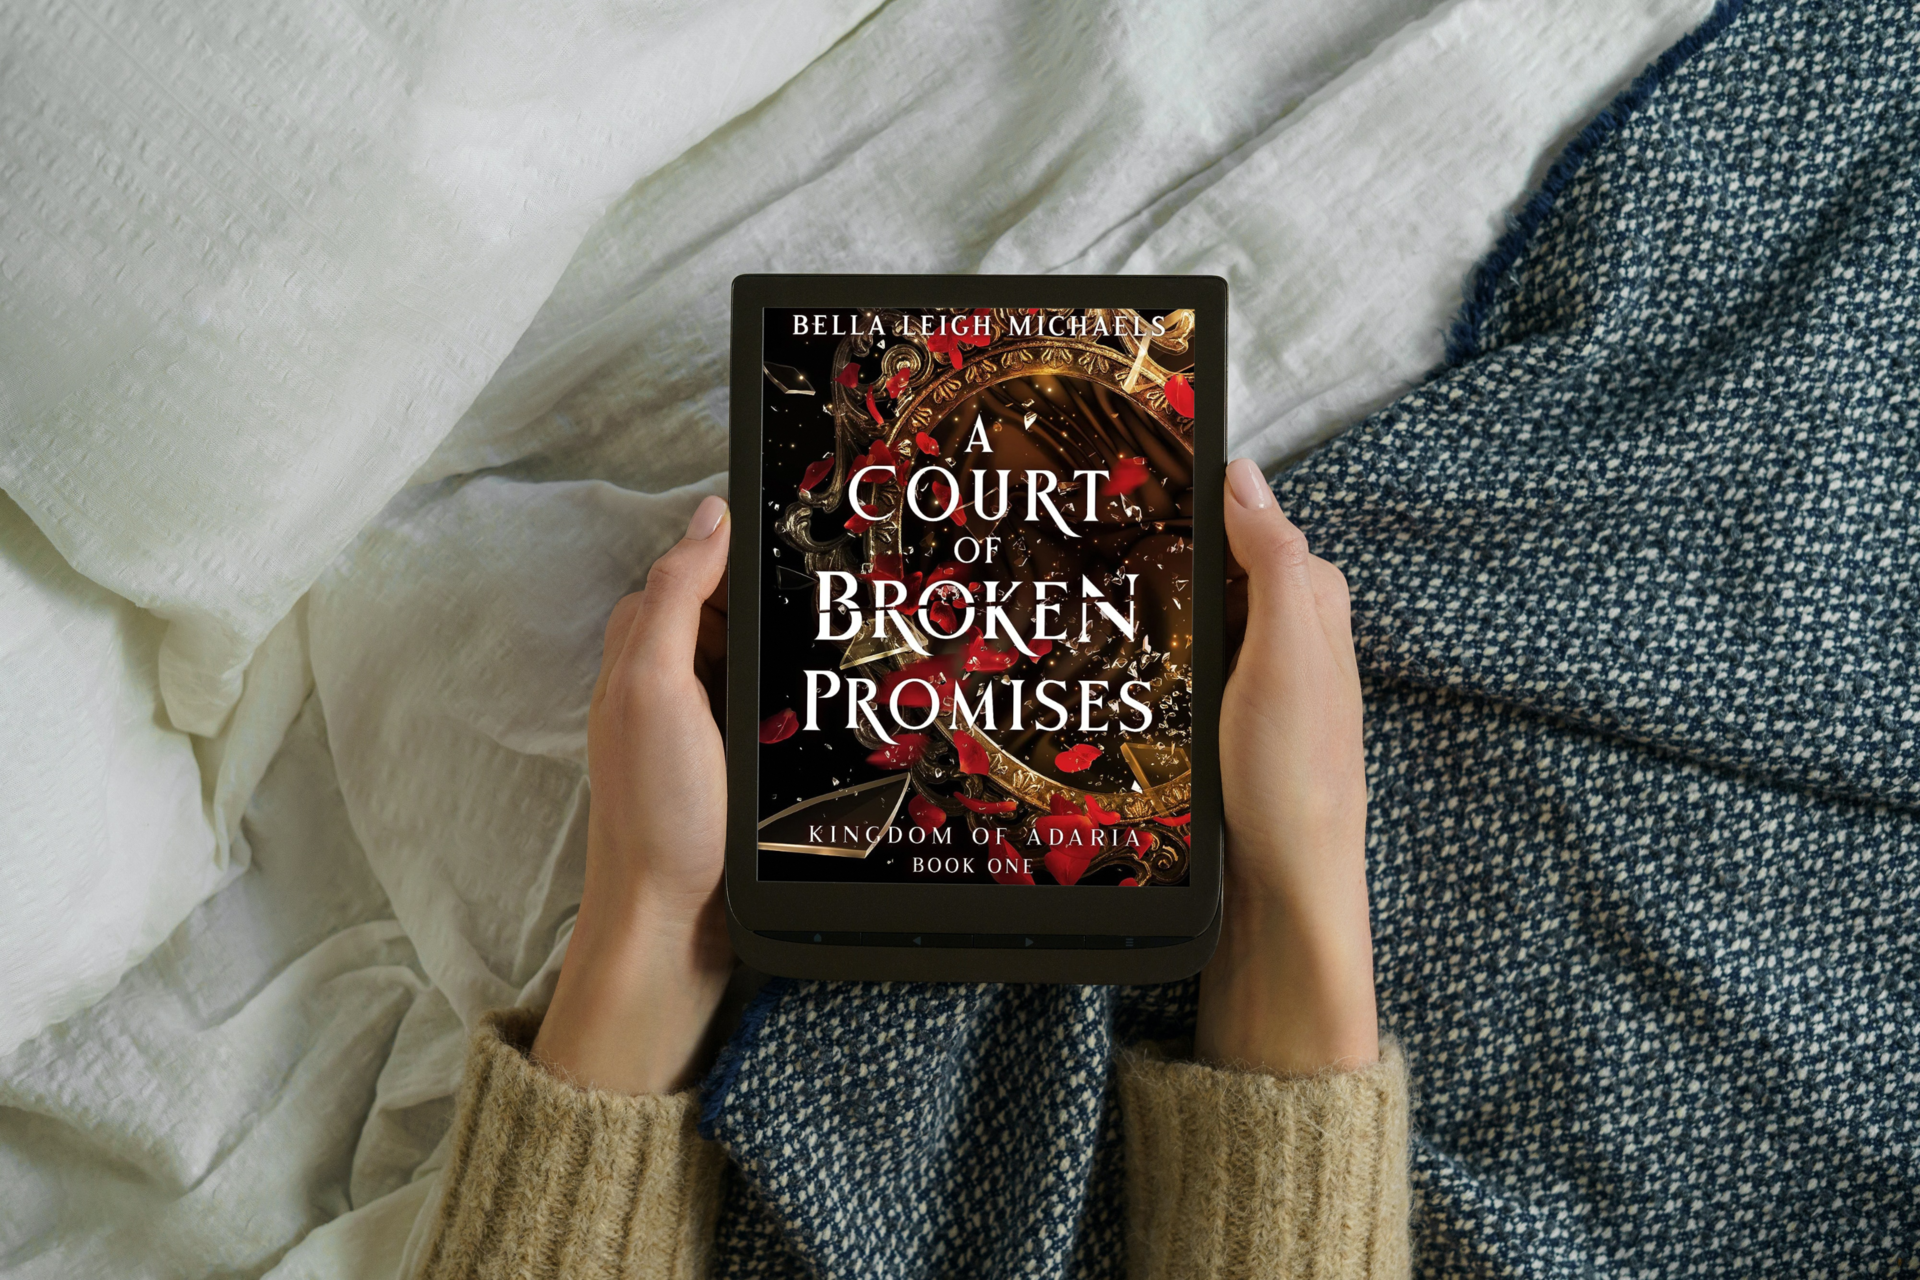 You are currently viewing Interview with Bella Leigh Michaels author of A Court of Broken Promises